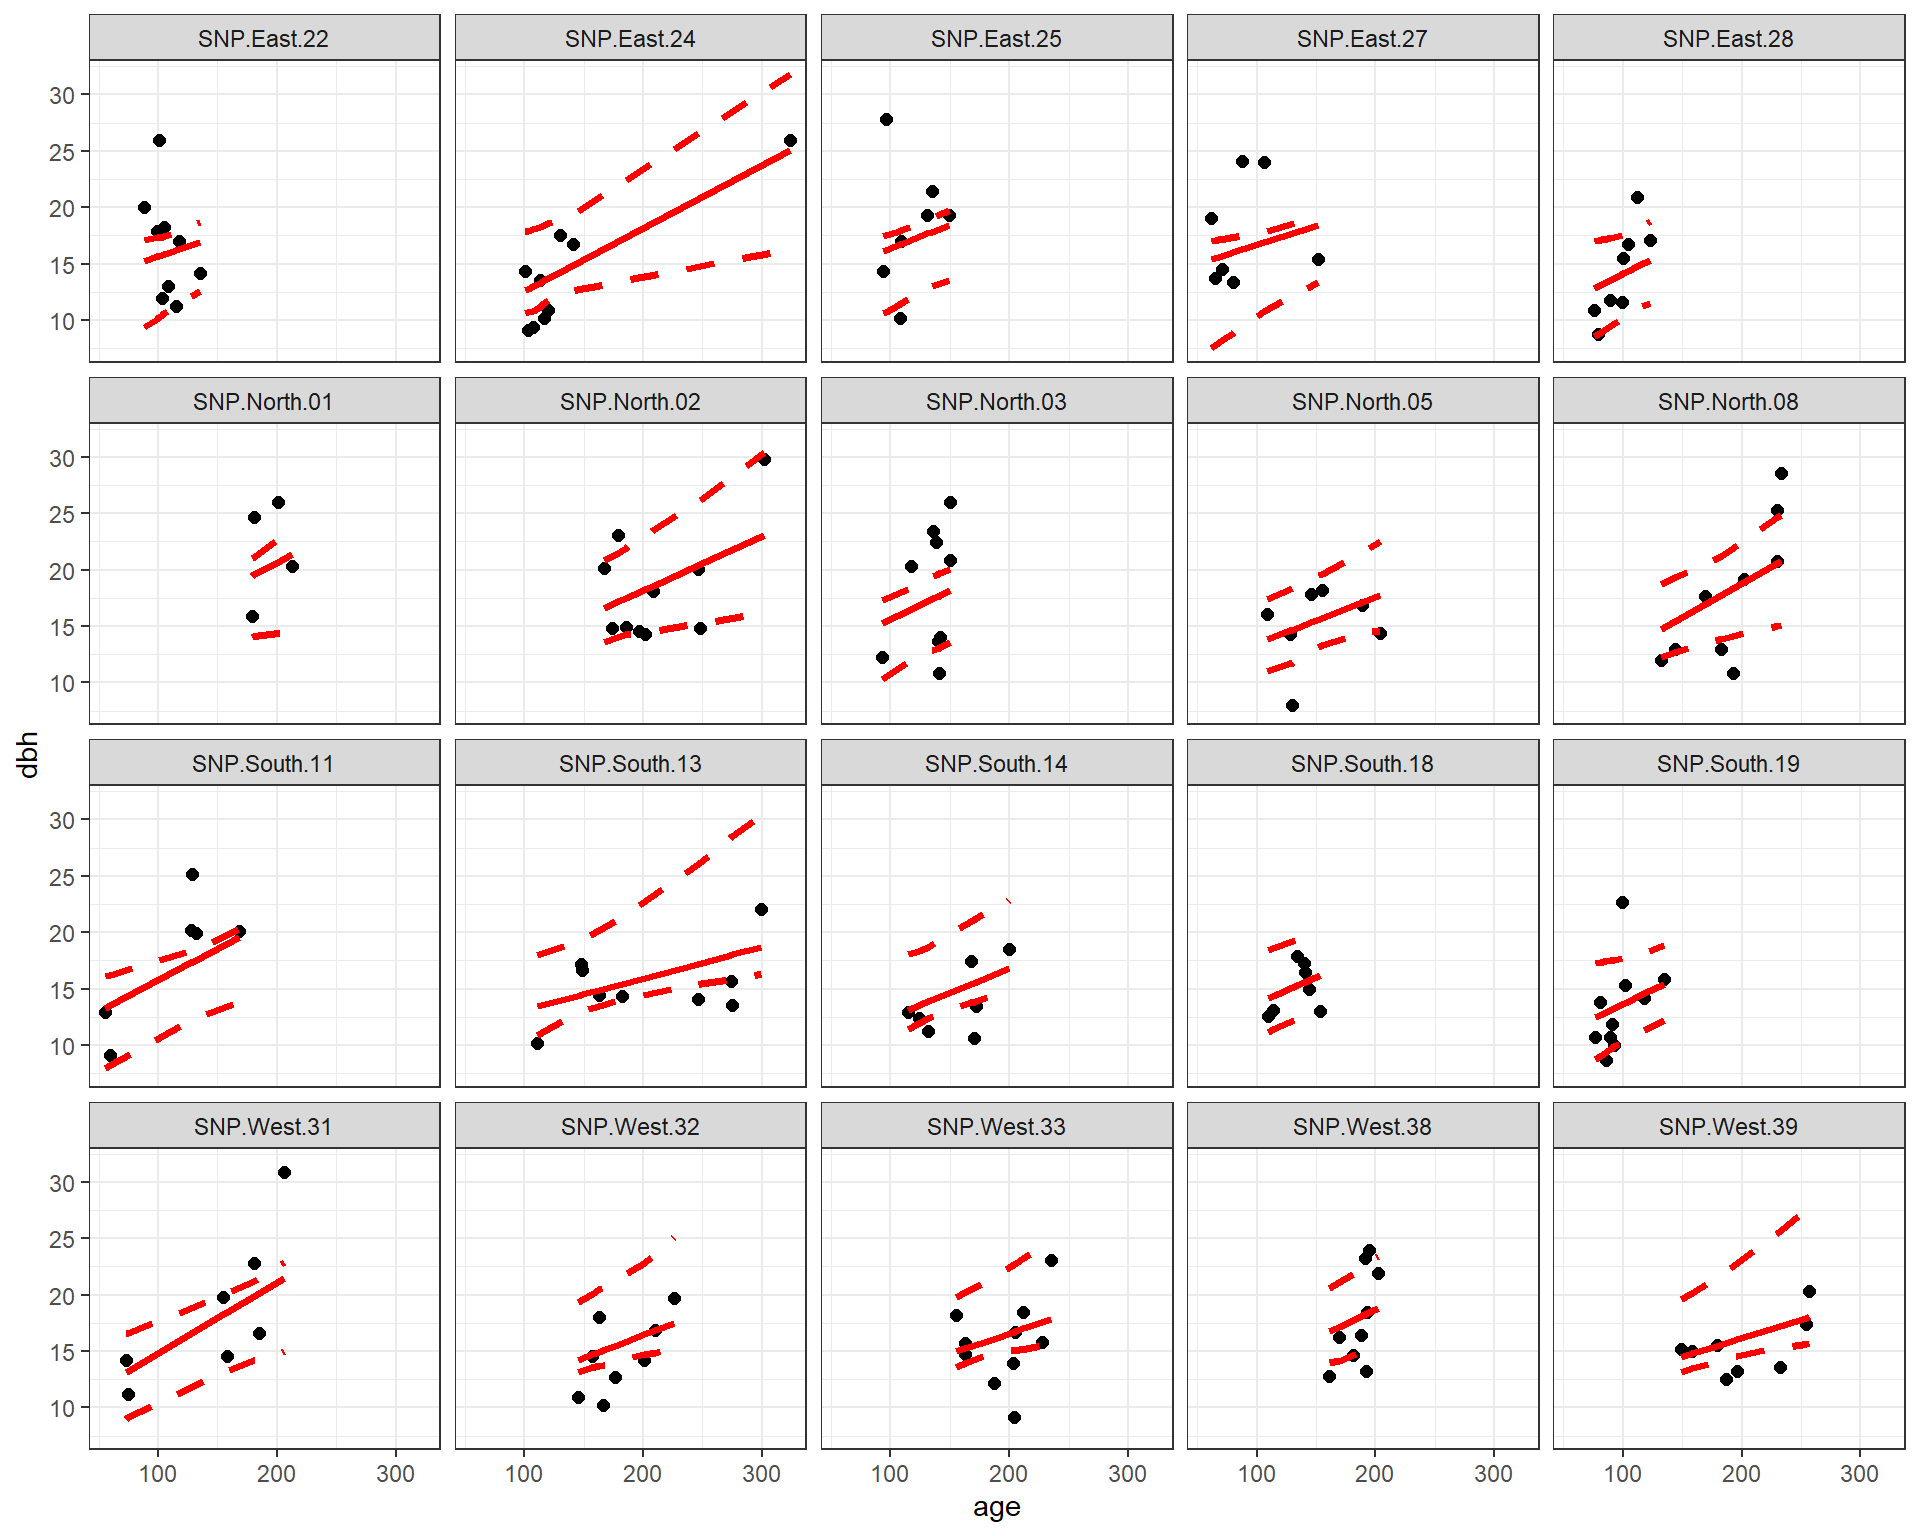 Fitted regression lines relating dbh to age using a mixed model containing random intercepts and slopes. A bootstrap was used to calculate pointwise 95-percent confidence intervals for site-specific lines.